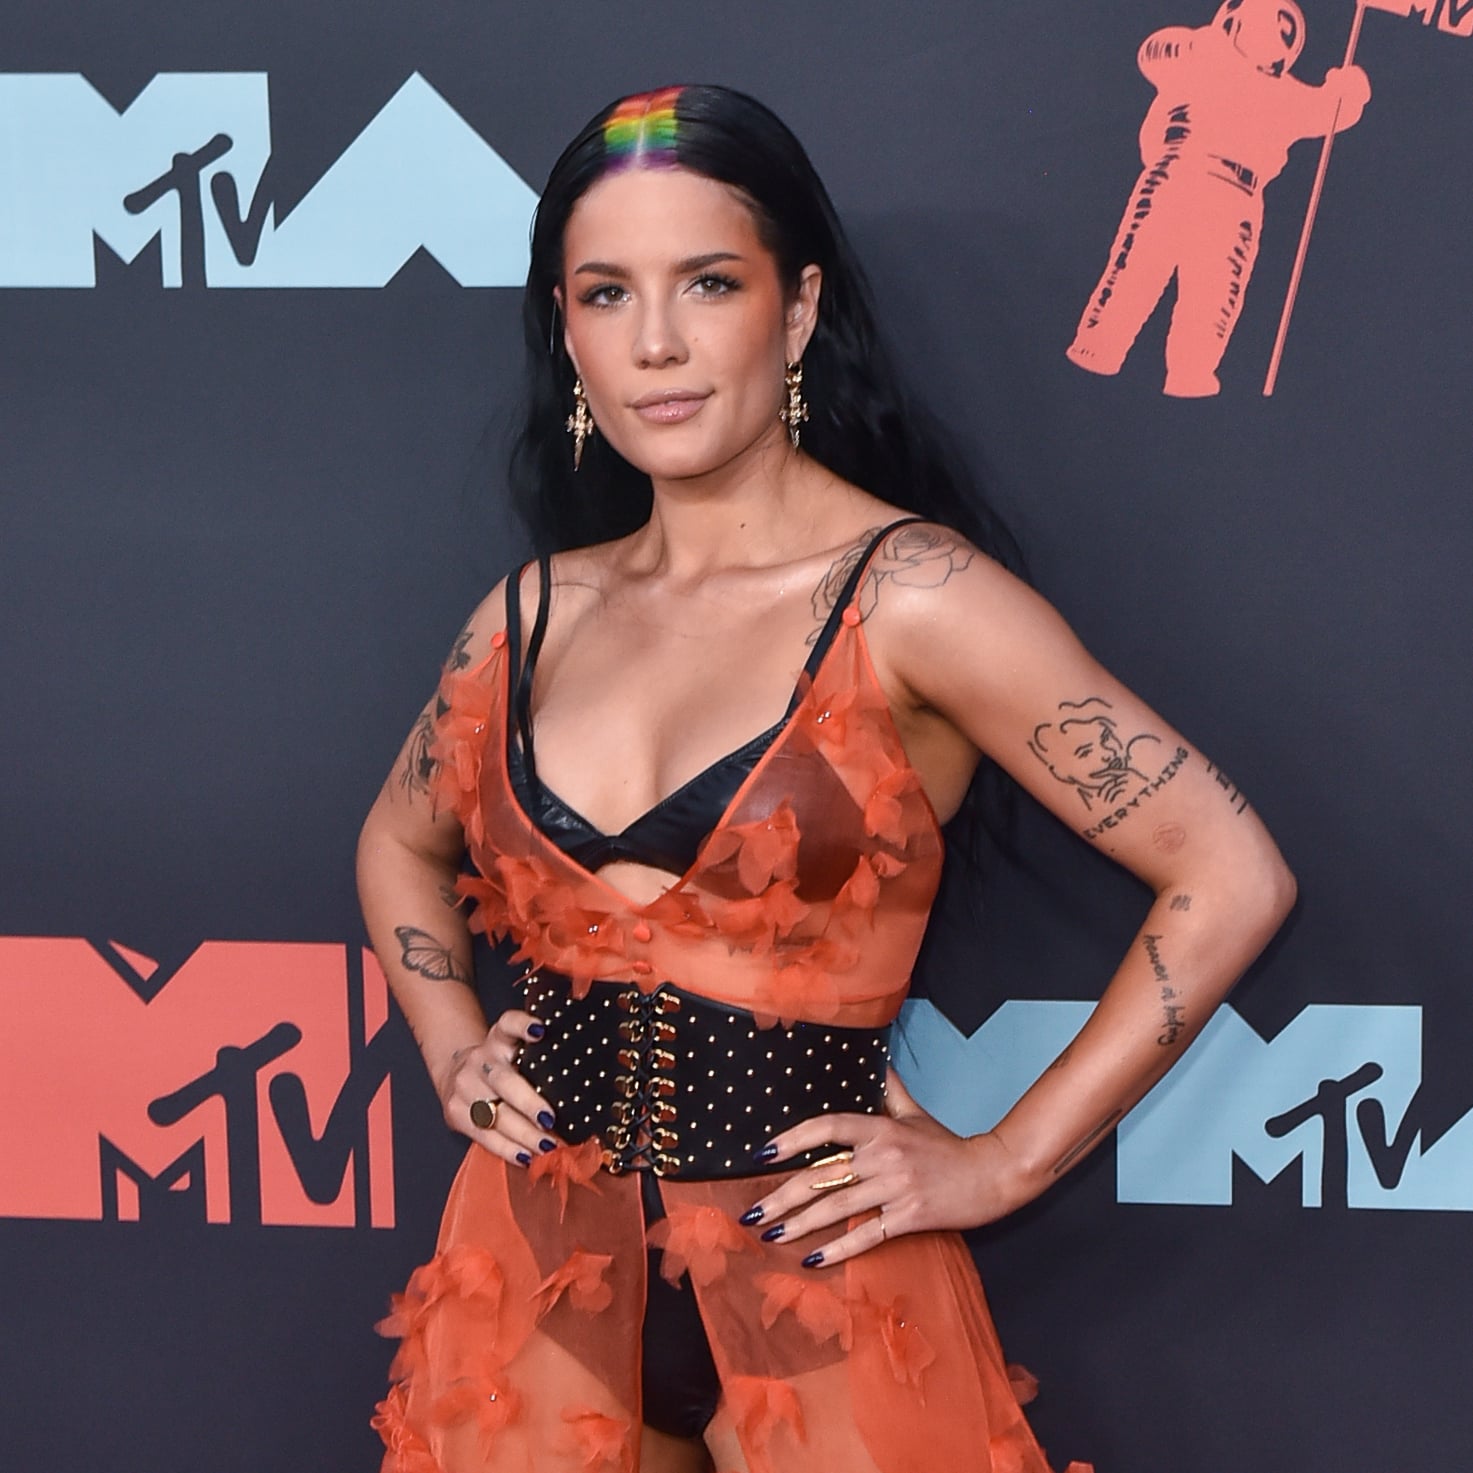 Halsey shares image of her new tattoo, designed by Lil Wayne